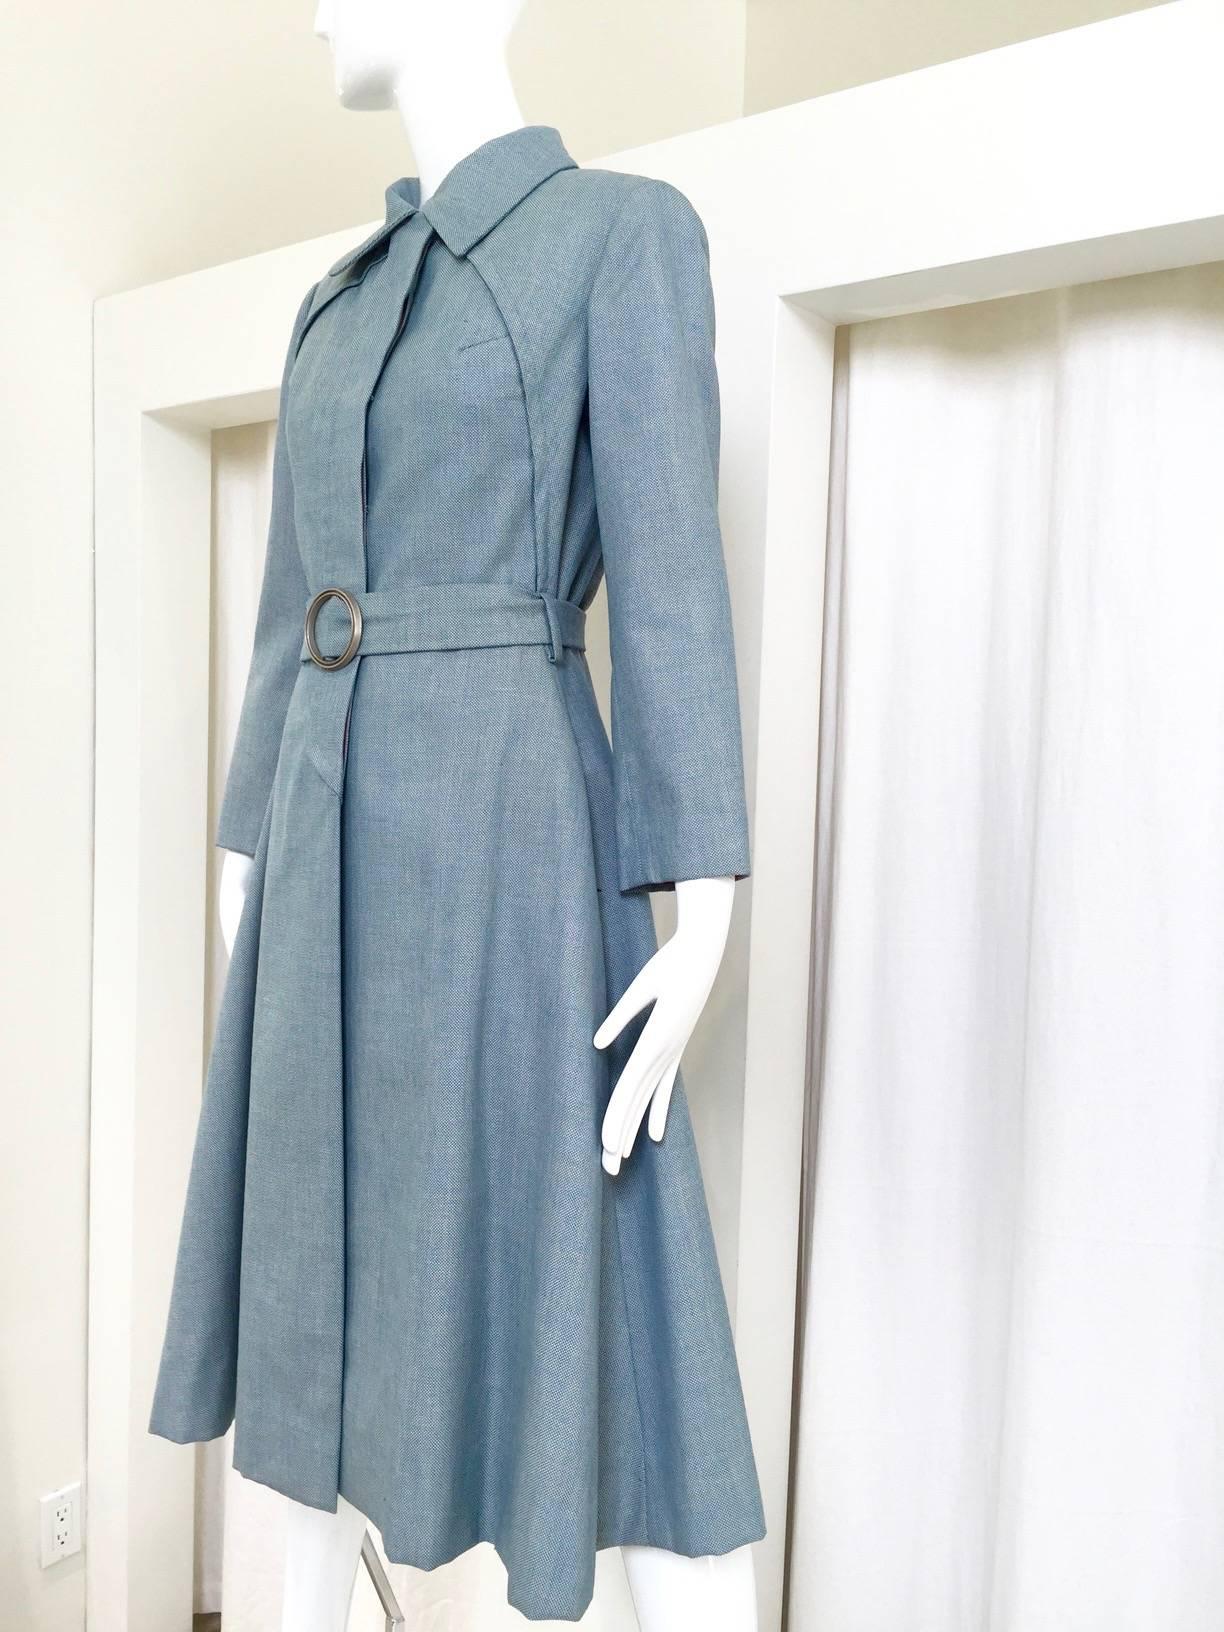 1970s Donald Brooks light blue cotton trench coat with belt. 
Bust: 36